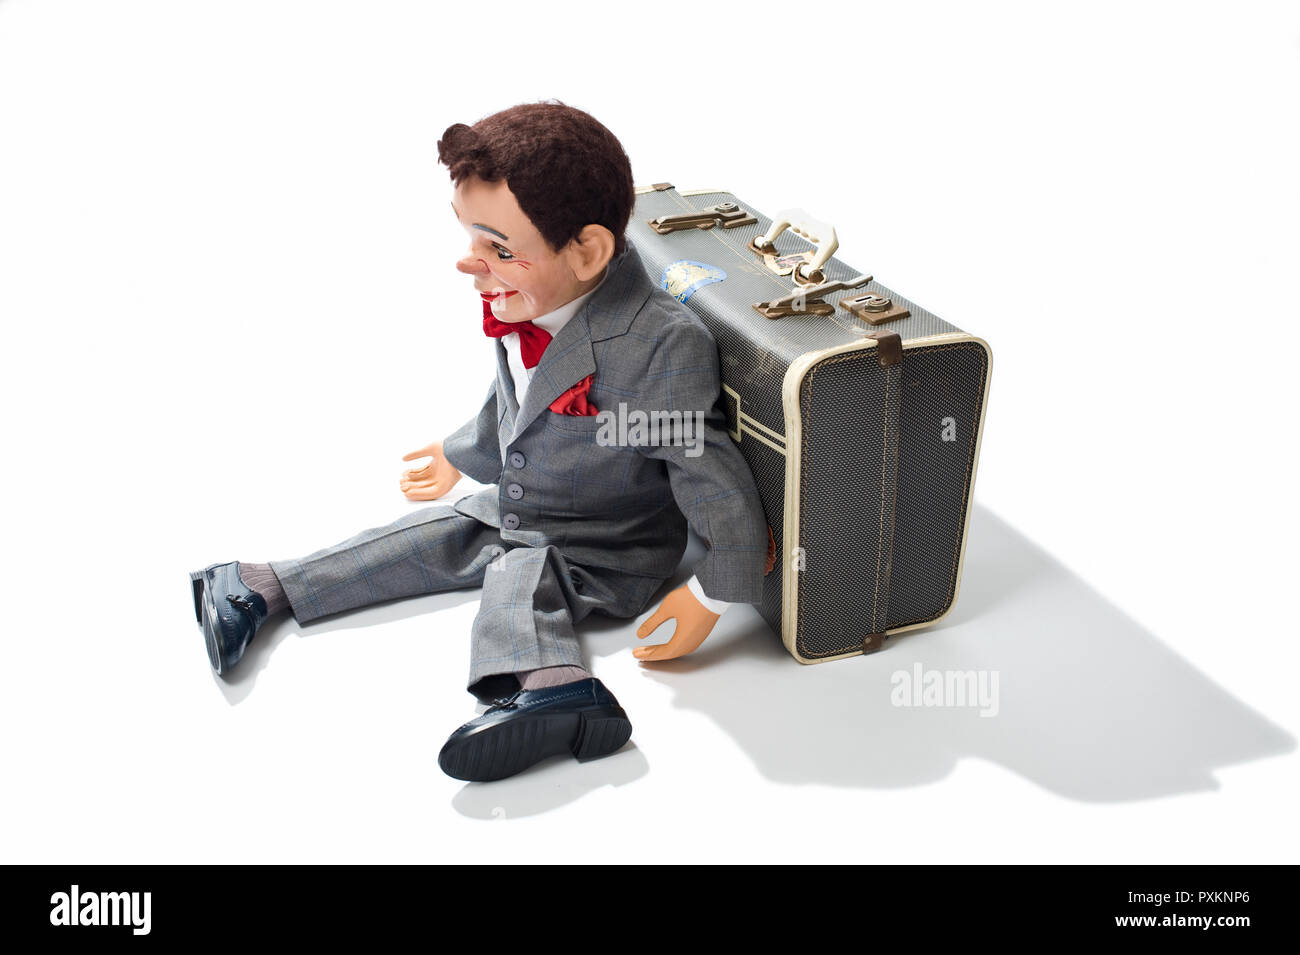 A ventriloquist dummy sitting against a suitcase Stock Photo